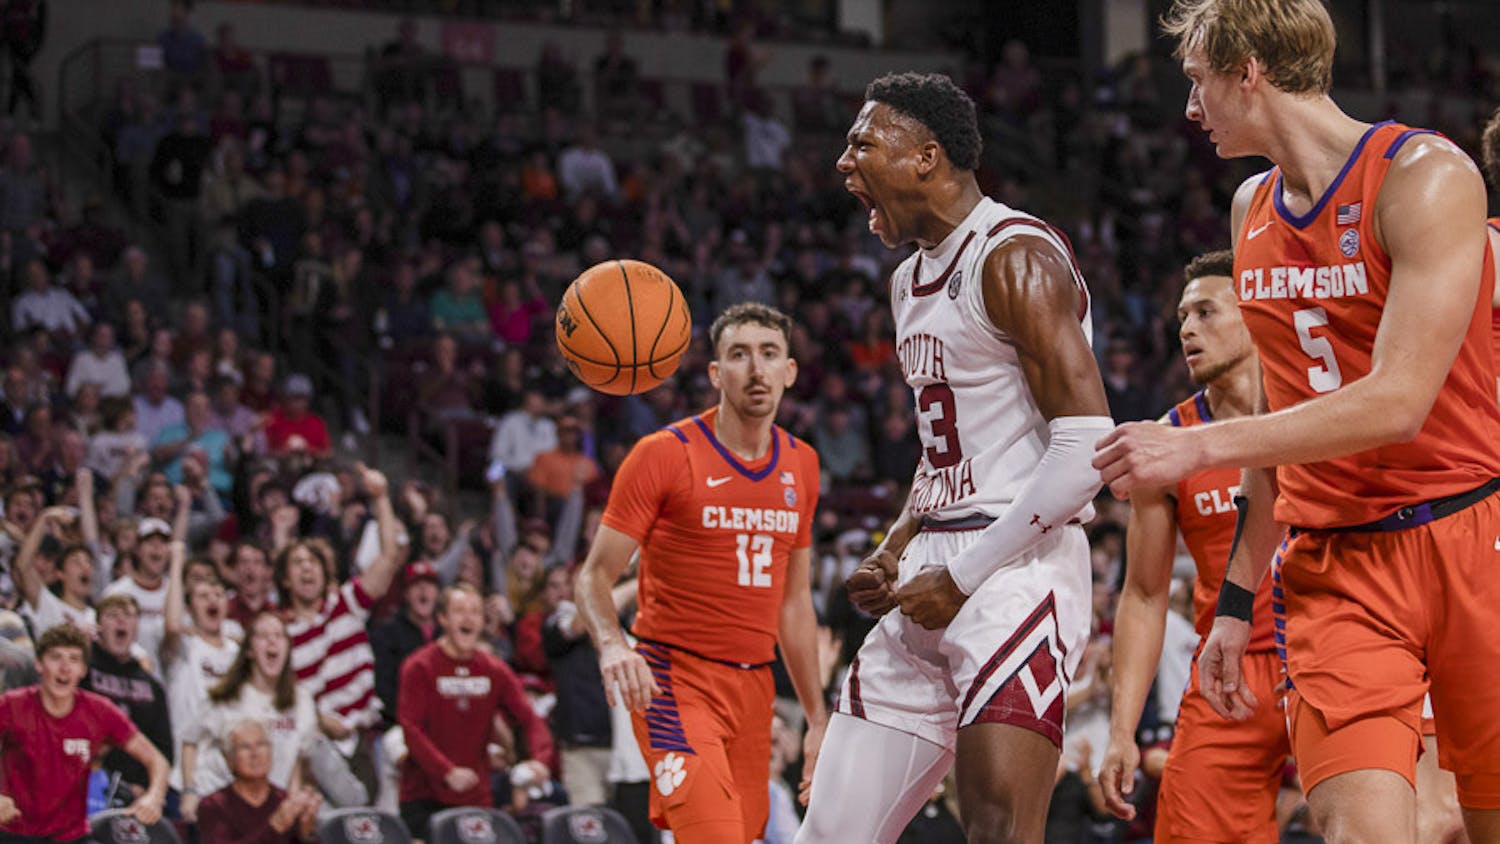 Freshman forward GG Jackson shouts in excitement after making a putback dunk in the match against Clemson at Colonial Life Arena on Nov. 11, 2023. The Gamecocks beat the Clemson Tigers 60-58.